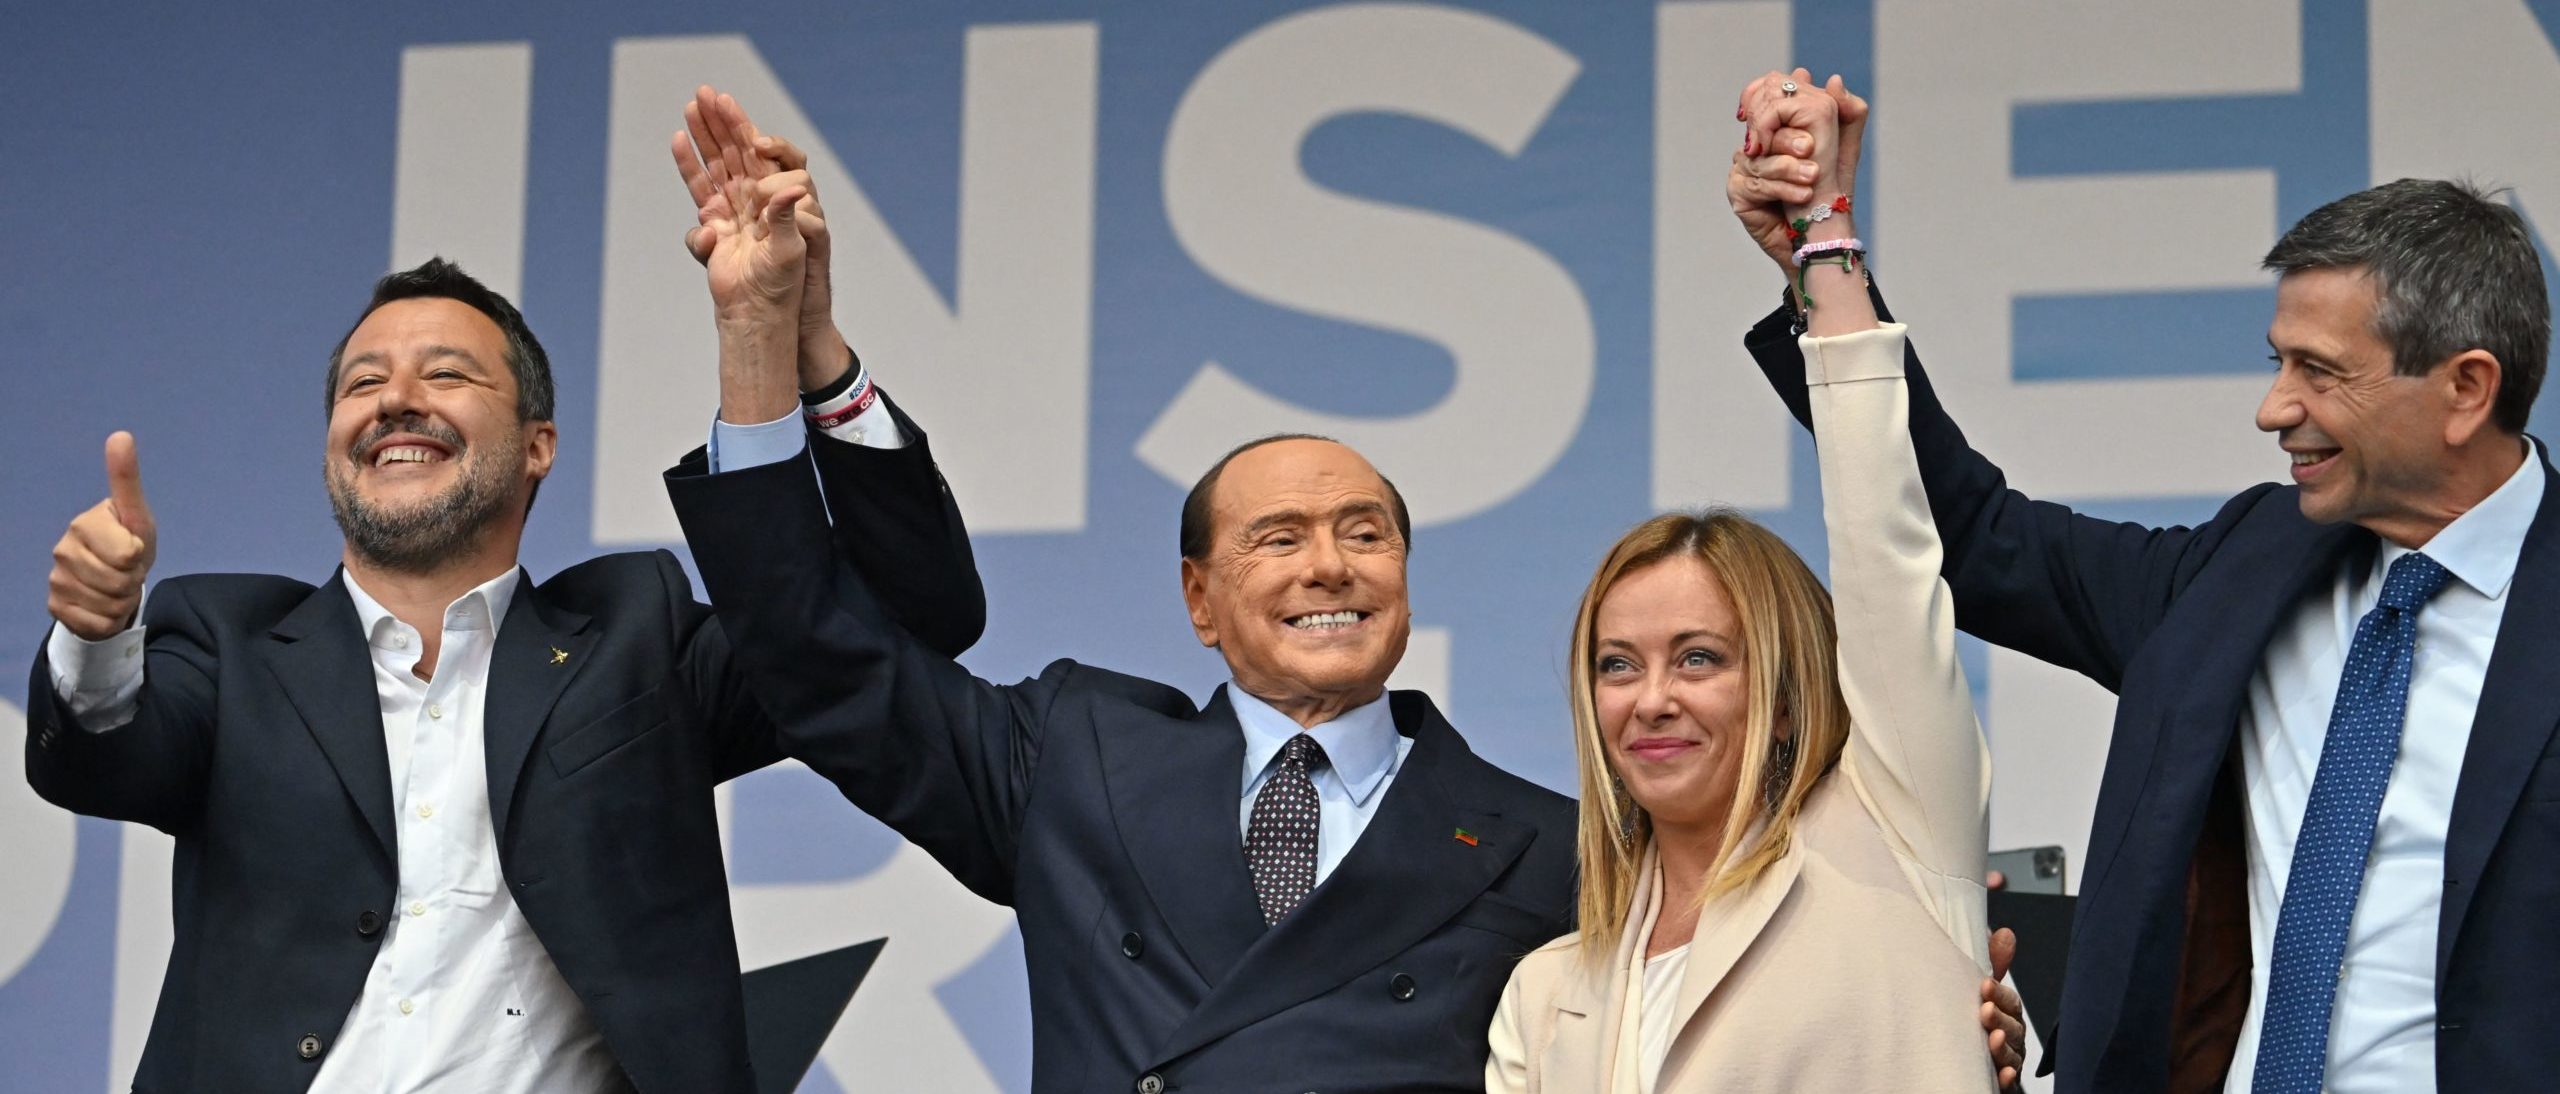 TOPSHOT - (From L) Leader of Italian far-right Lega (League) party Matteo Salvini, Forza Italia leader Silvio Berlusconi, leader of Italian far-right party "Fratelli d'Italia" (Brothers of Italy) Giorgia Meloni, and Italian centre-right lawmaker Maurizio Lupi stand on stage on September 22, 2022 during a joint rally of Italy's coalition of far-right and right-wing parties Brothers of Italy (Fratelli d'Italia, FdI), the League (Lega) and Forza Italia at Piazza del Popolo in Rome, ahead of the September 25 general election.